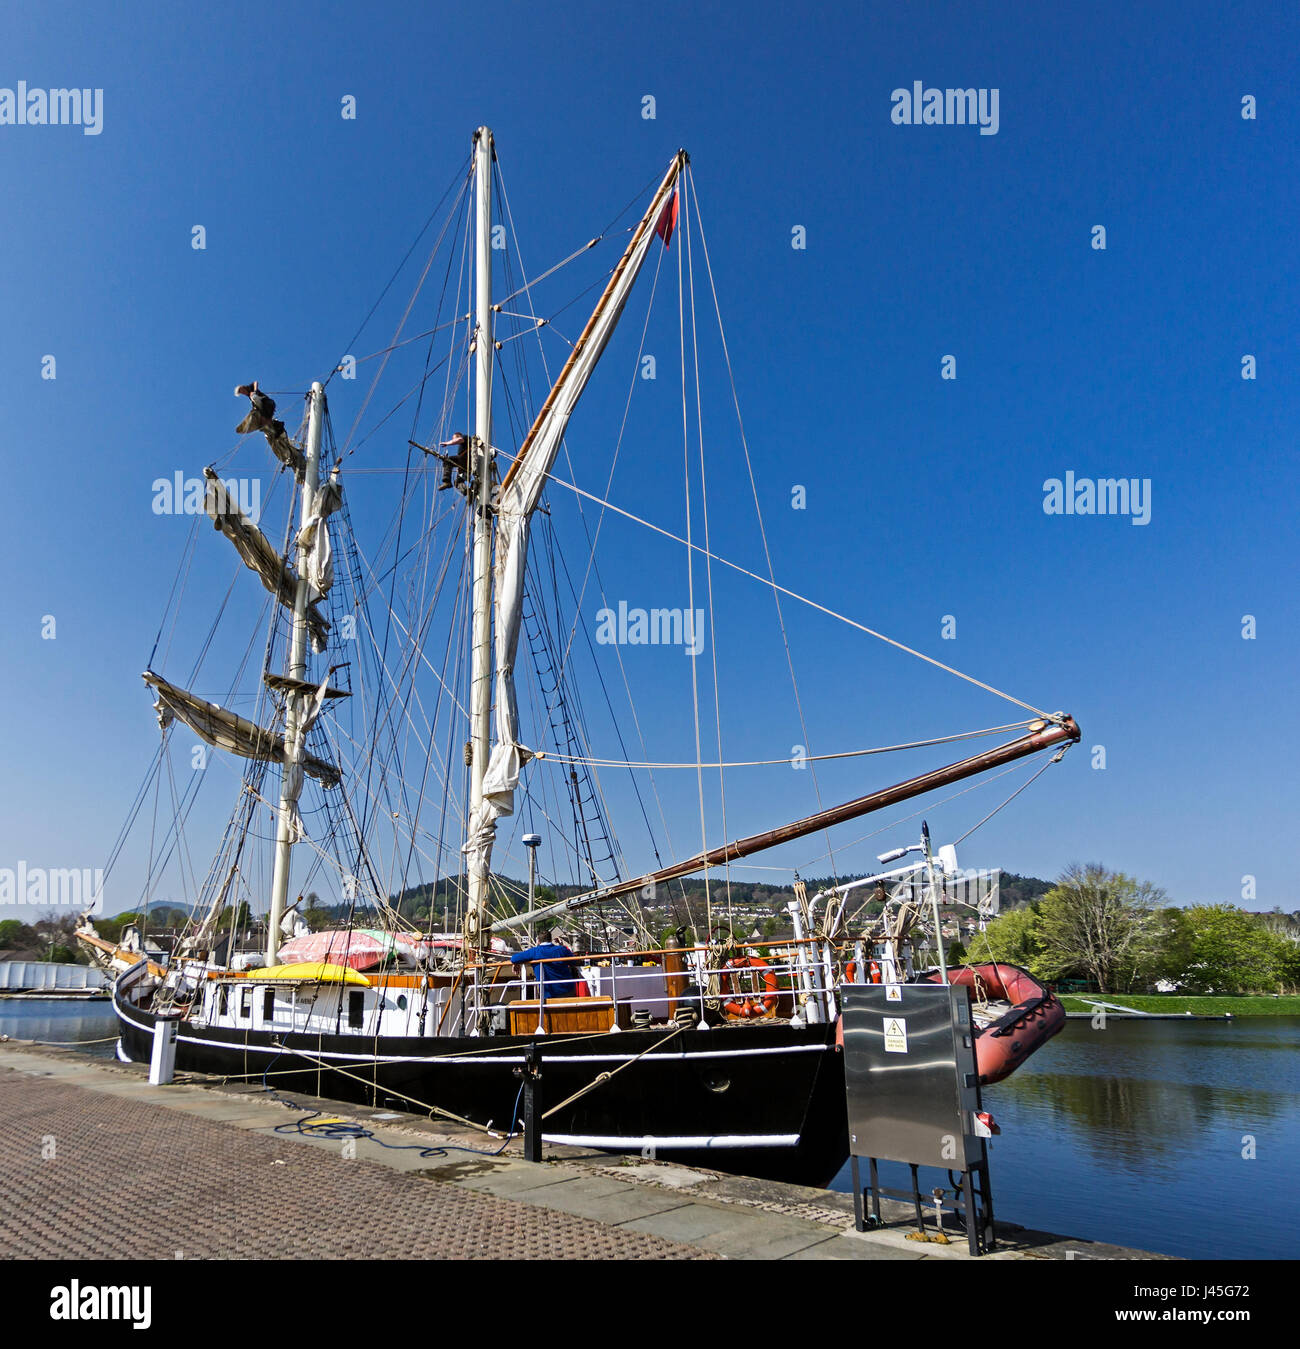 The Lady of Avanel sailing ship moored in the Caledonian Canal basin Clachnaharry Inverness Scotland UK Stock Photo